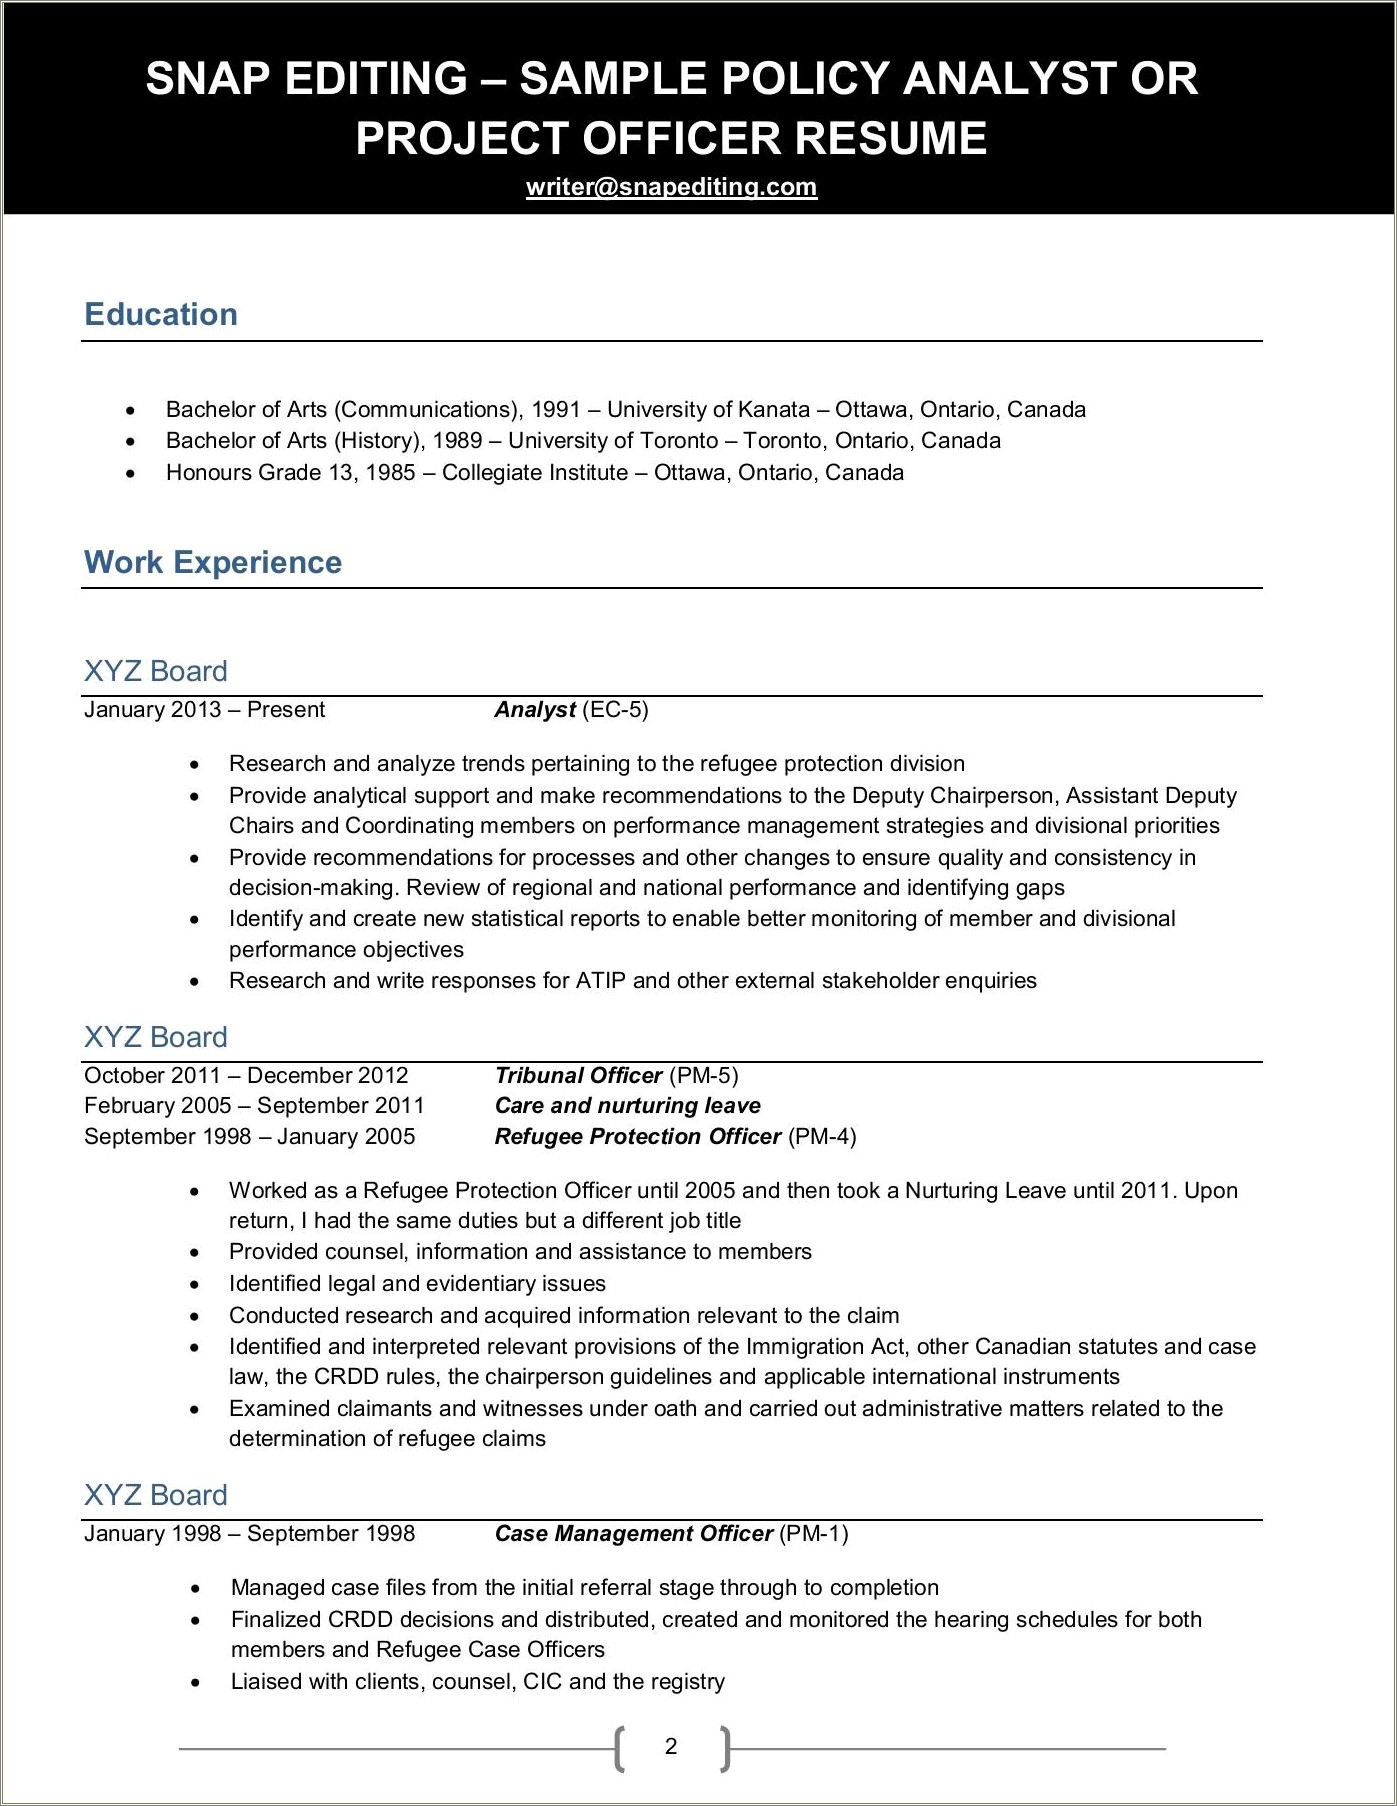 Sample Resume For Public Policy Analyst